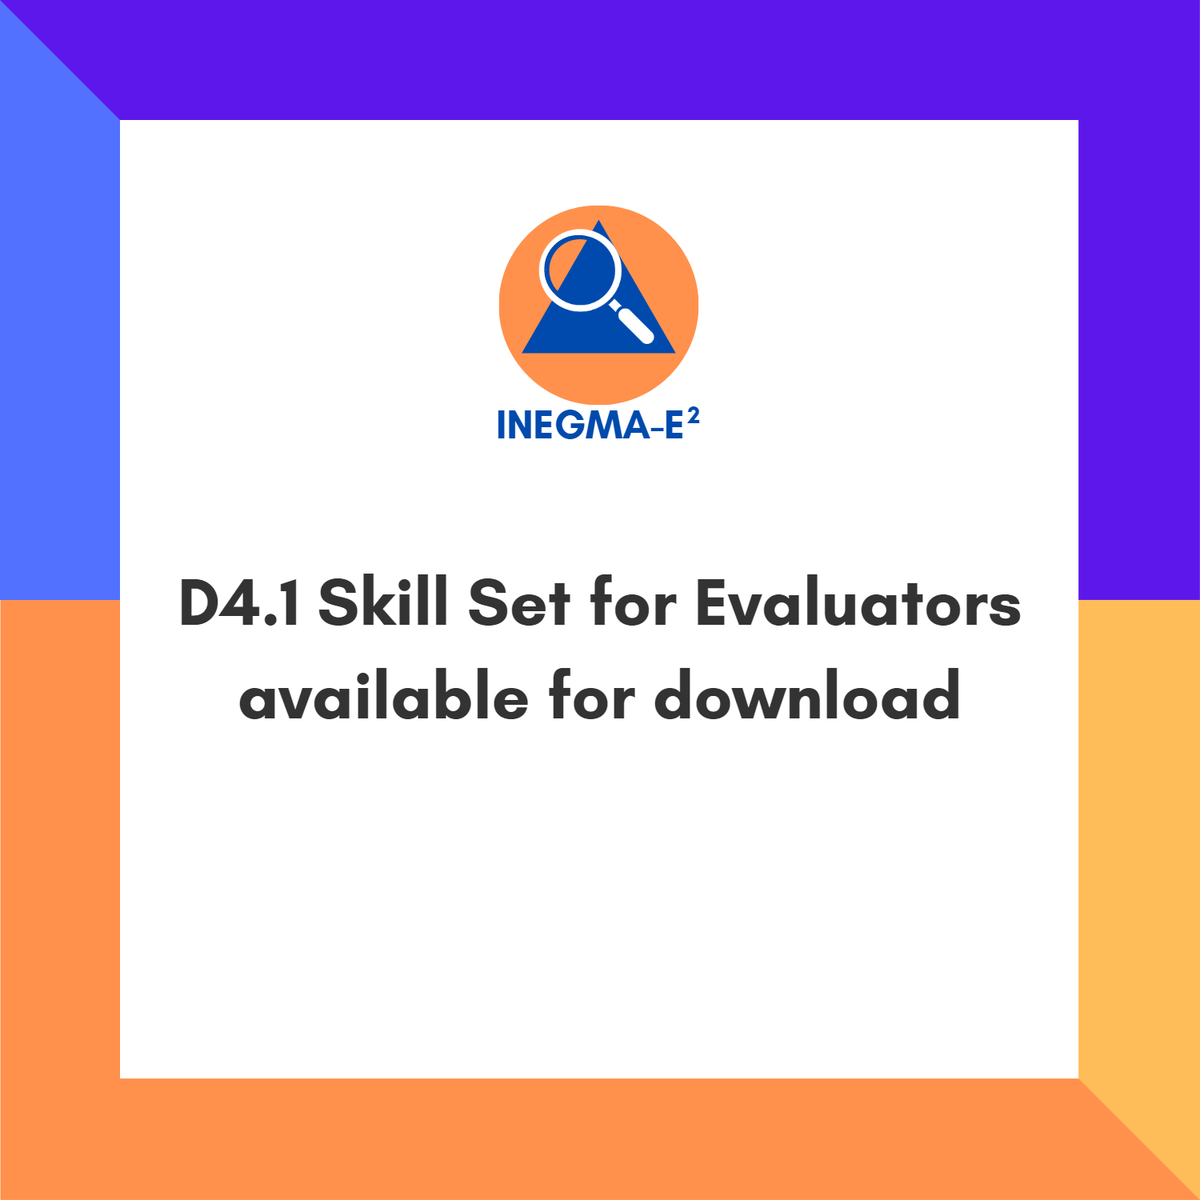 We're happy to announce that we've just made our next report public on our #UCPKN page:

⚠ Deliverable 4.1 - Skill Set for Evaluators ⚠ 

Download it here: …rotection-knowledge-network.europa.eu/projects/inegm…

#EUproject #ECHO #UCPKN #civilprotection #exerciseevaluation